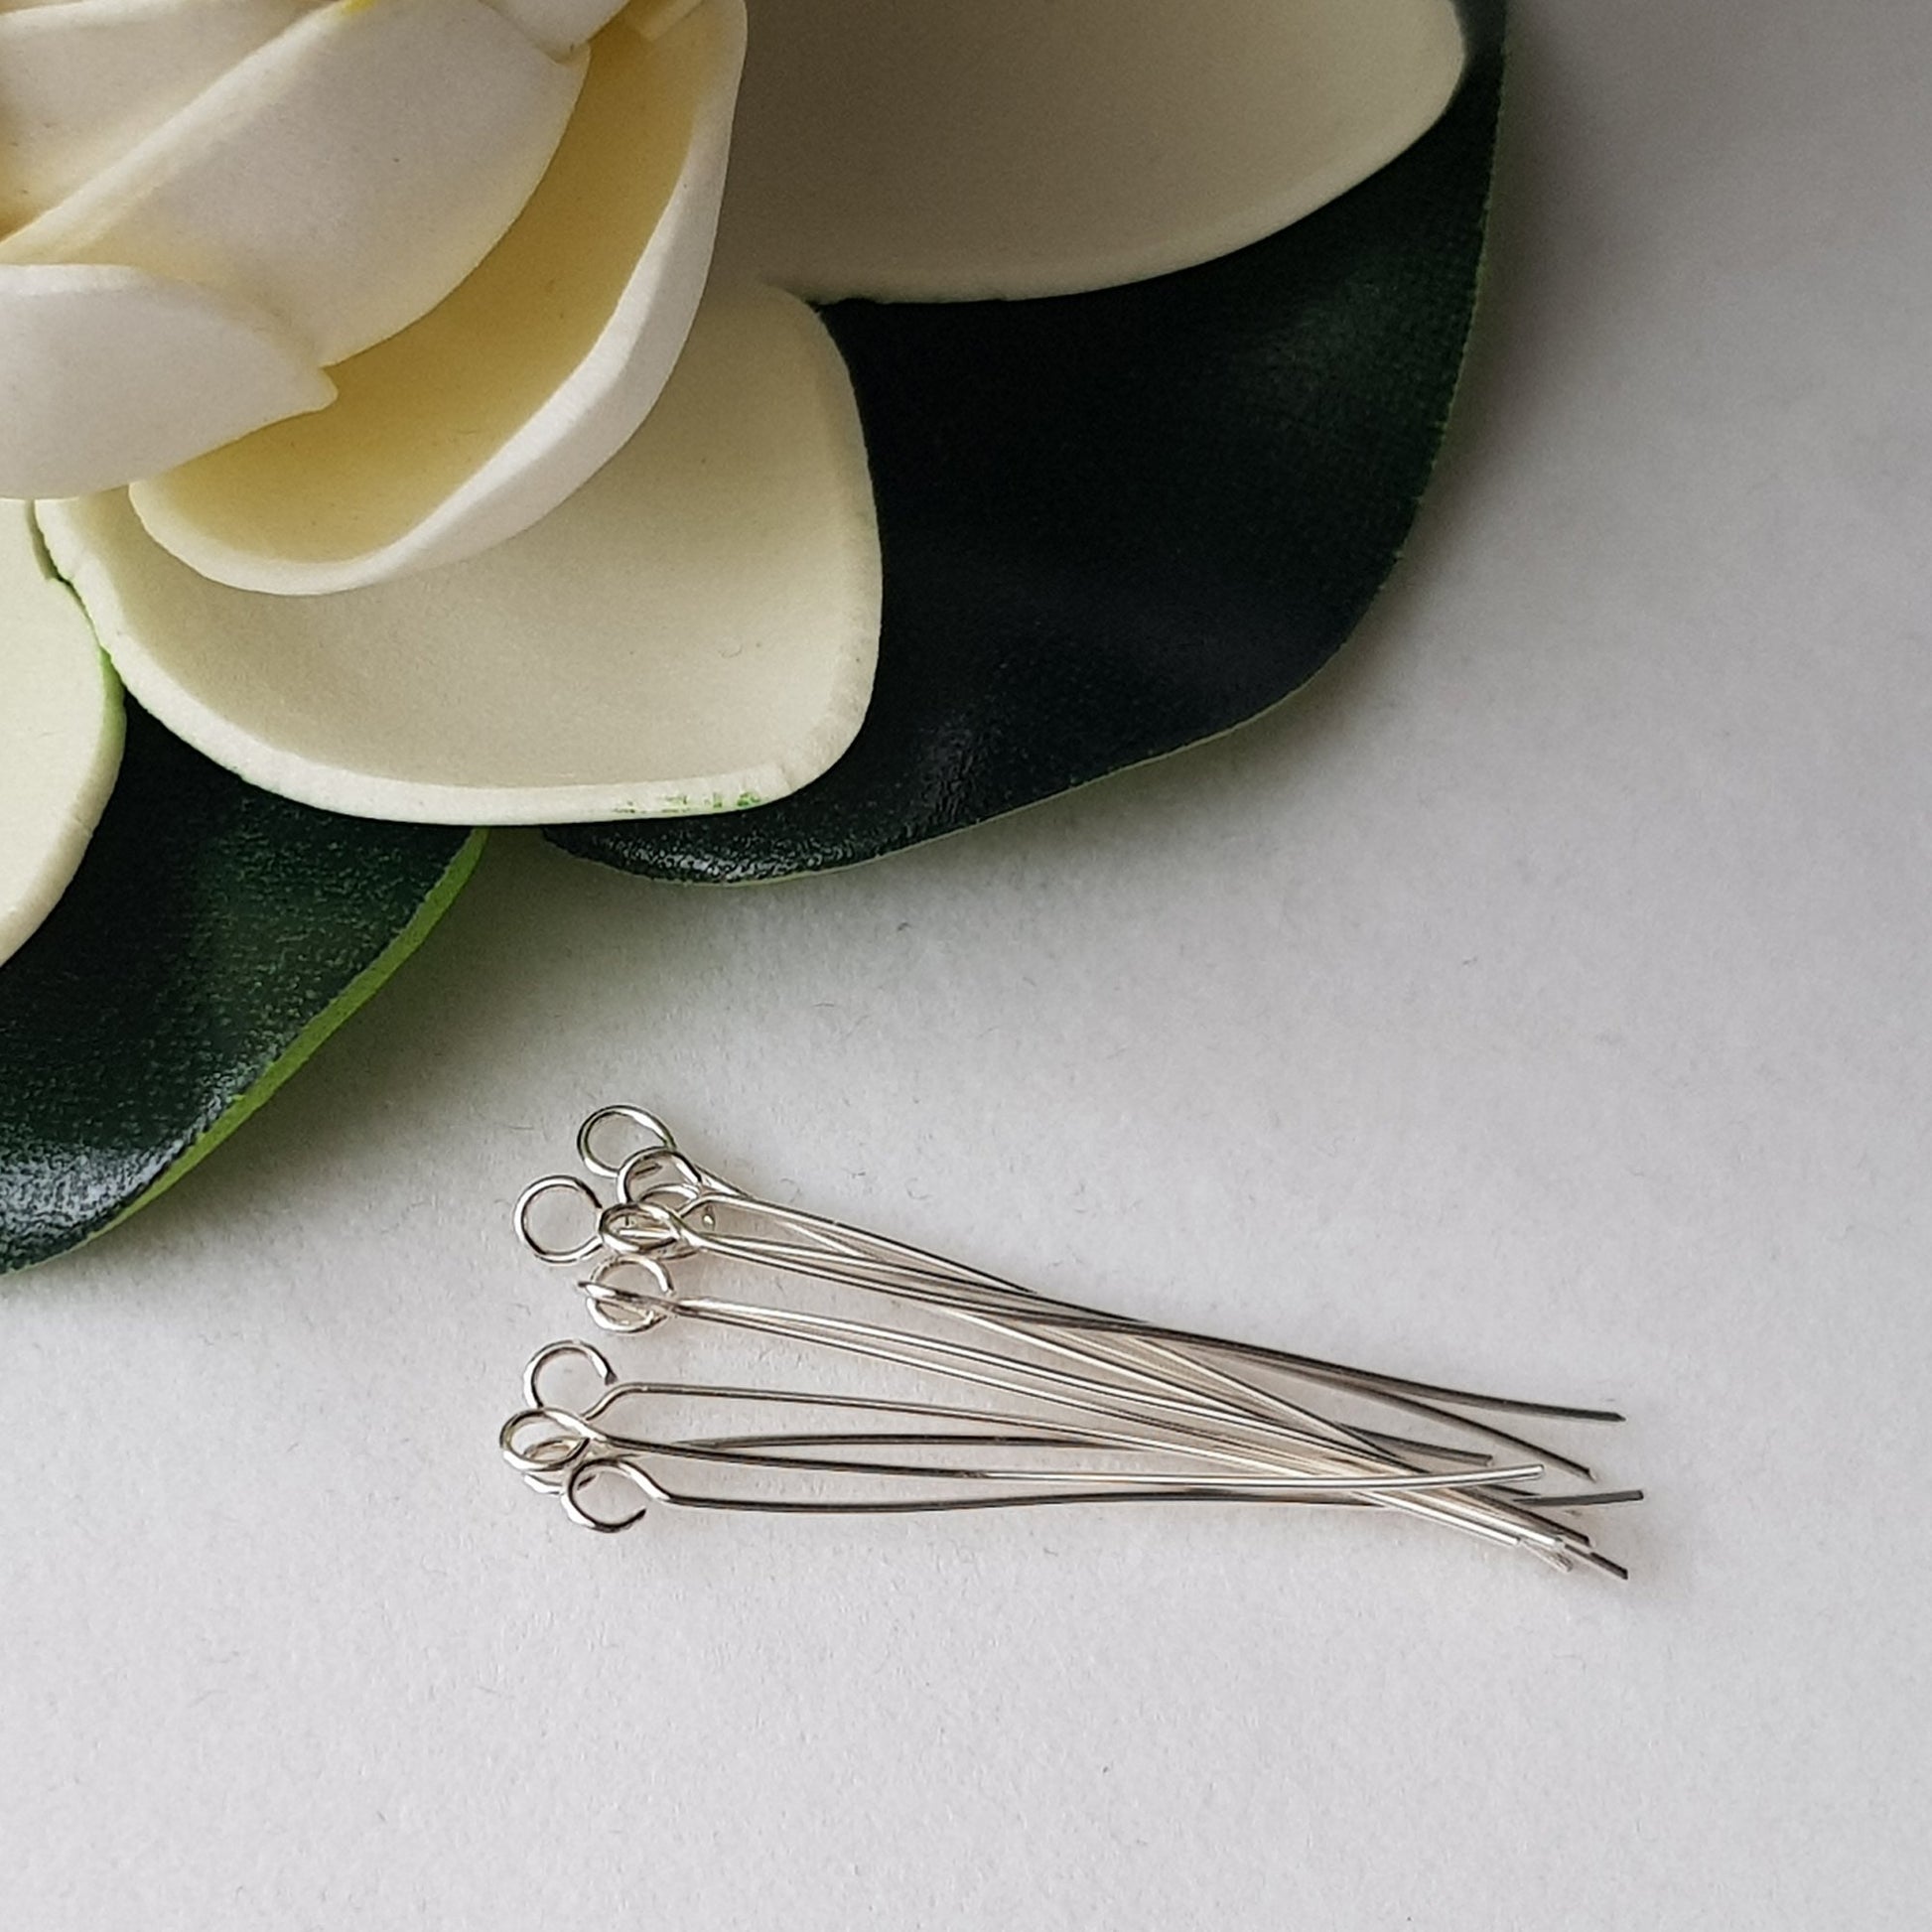 Eye Pins 40mm - 24 gauge (0.5mm) Sterling Silver (10pc Pack) | SS-GF540/EP | Jewellery Making Supply - Kalitheo 